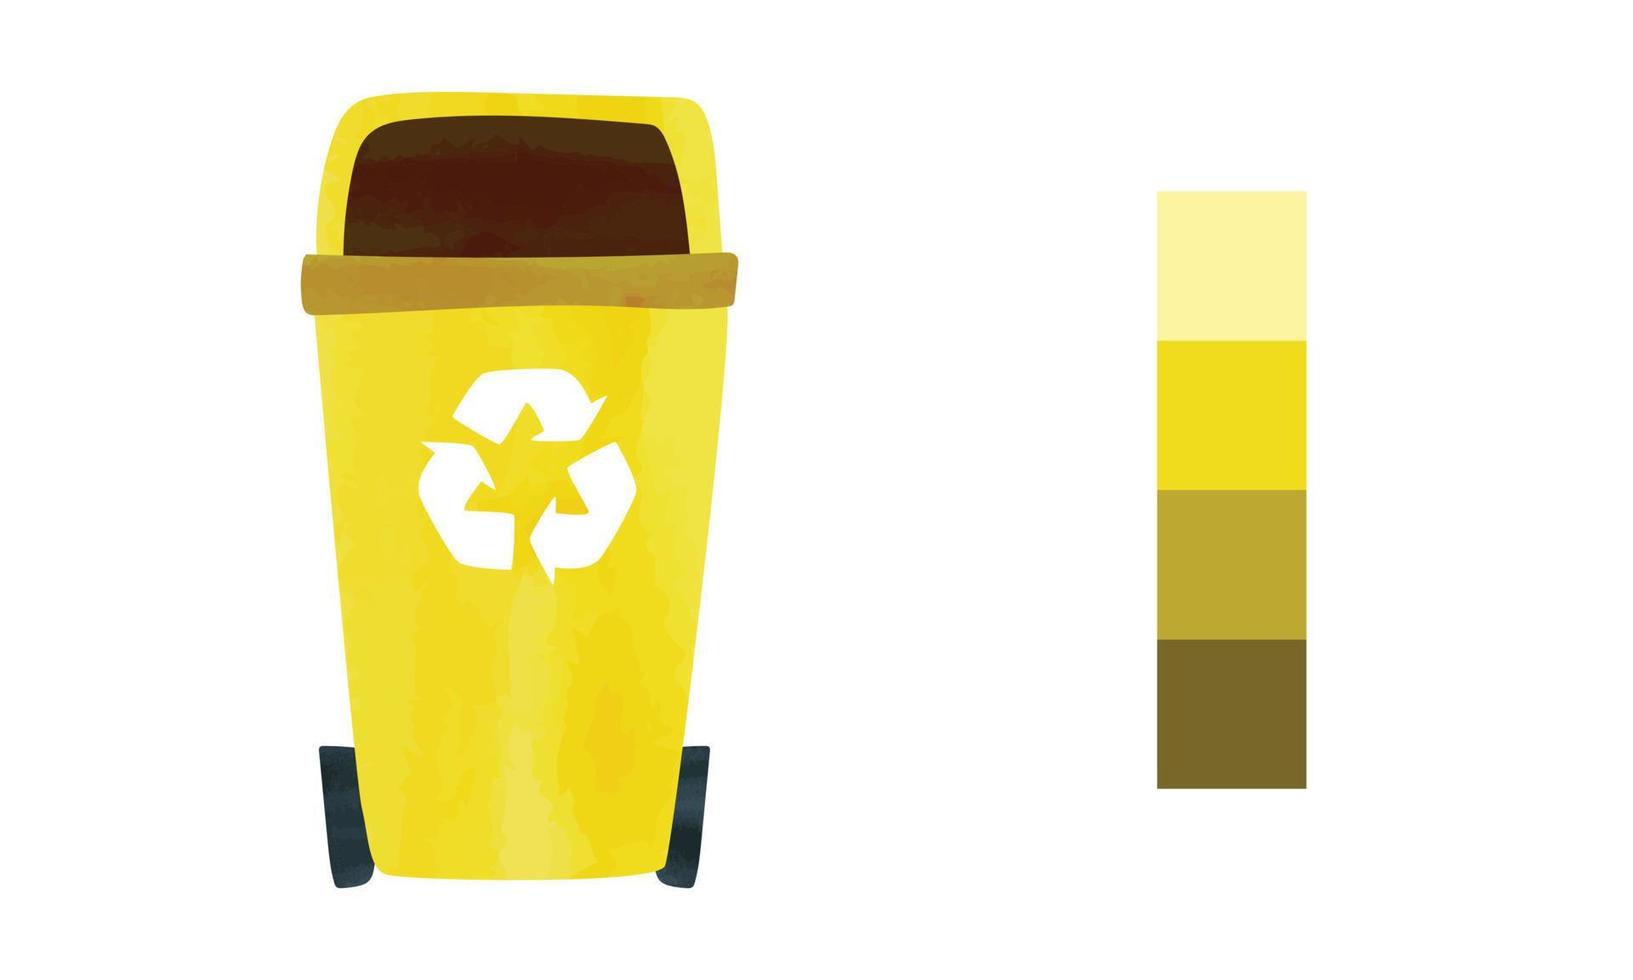 Yellow recycling bin with recycle symbol watercolor drawing isolated on white background. Recycle bin clipart. Rubbish can vector illustration. Simple garbage can hand drawn cartoon